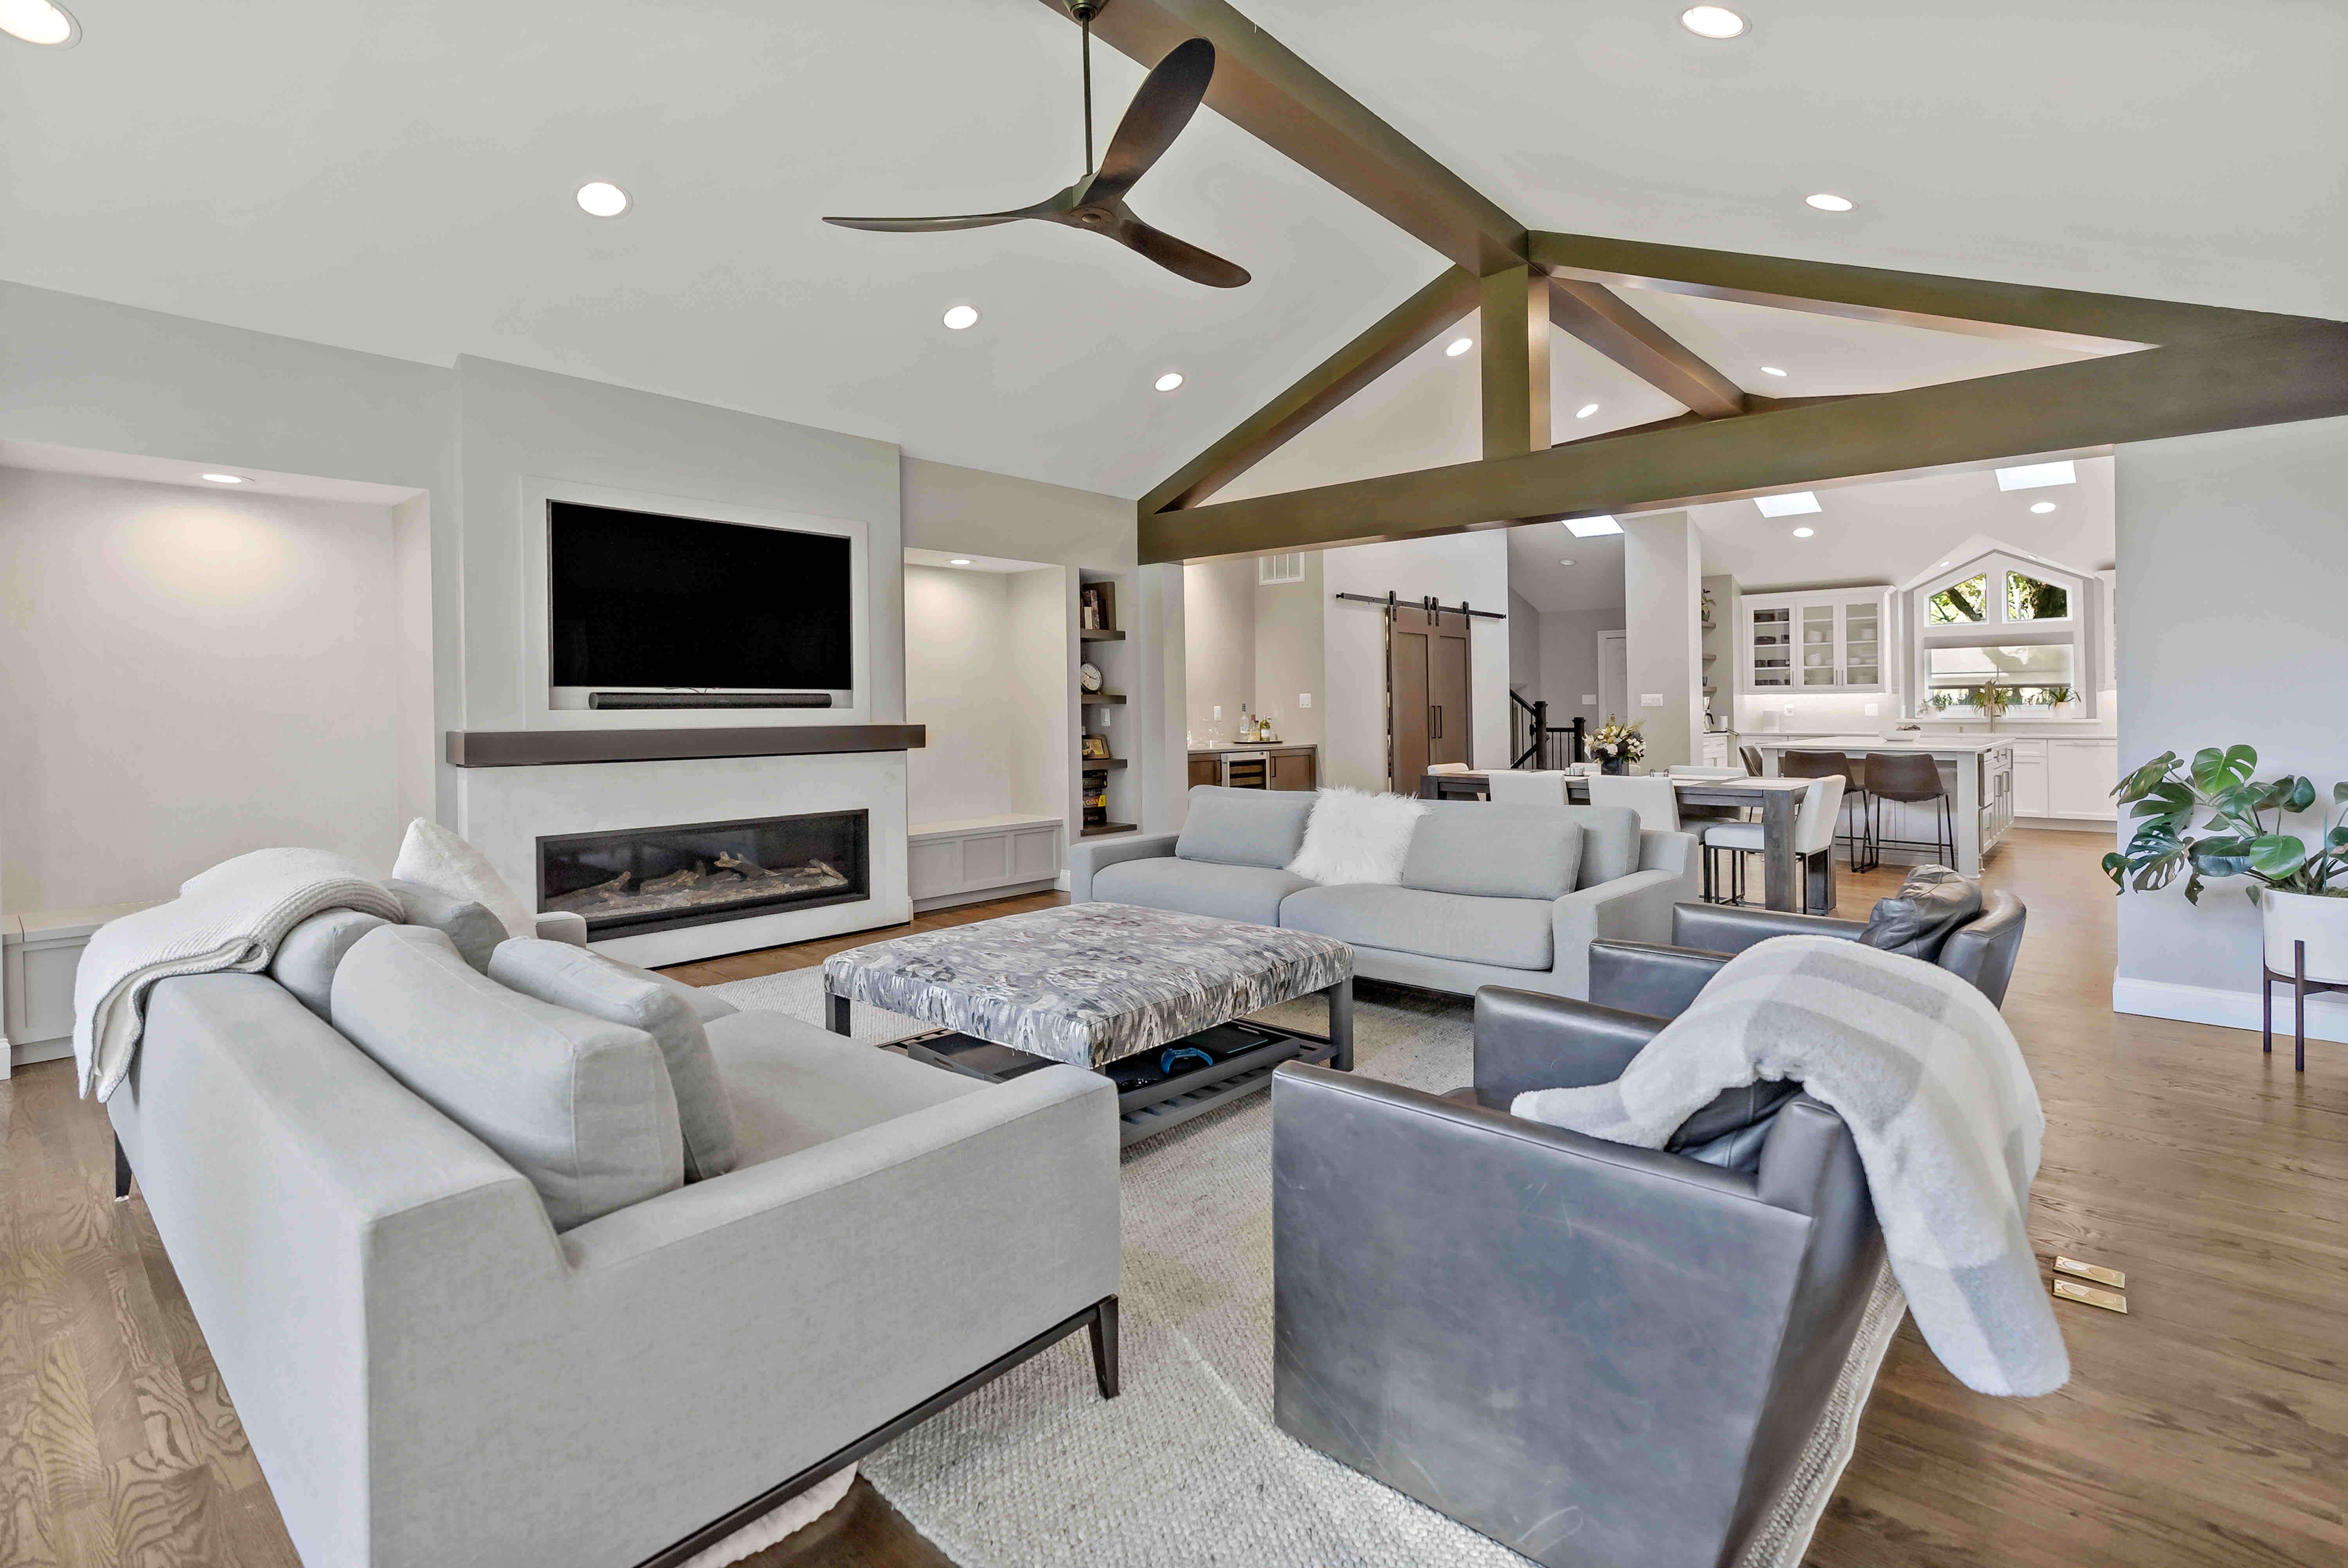 Exposed wooden beams on cathedral ceiling in living room